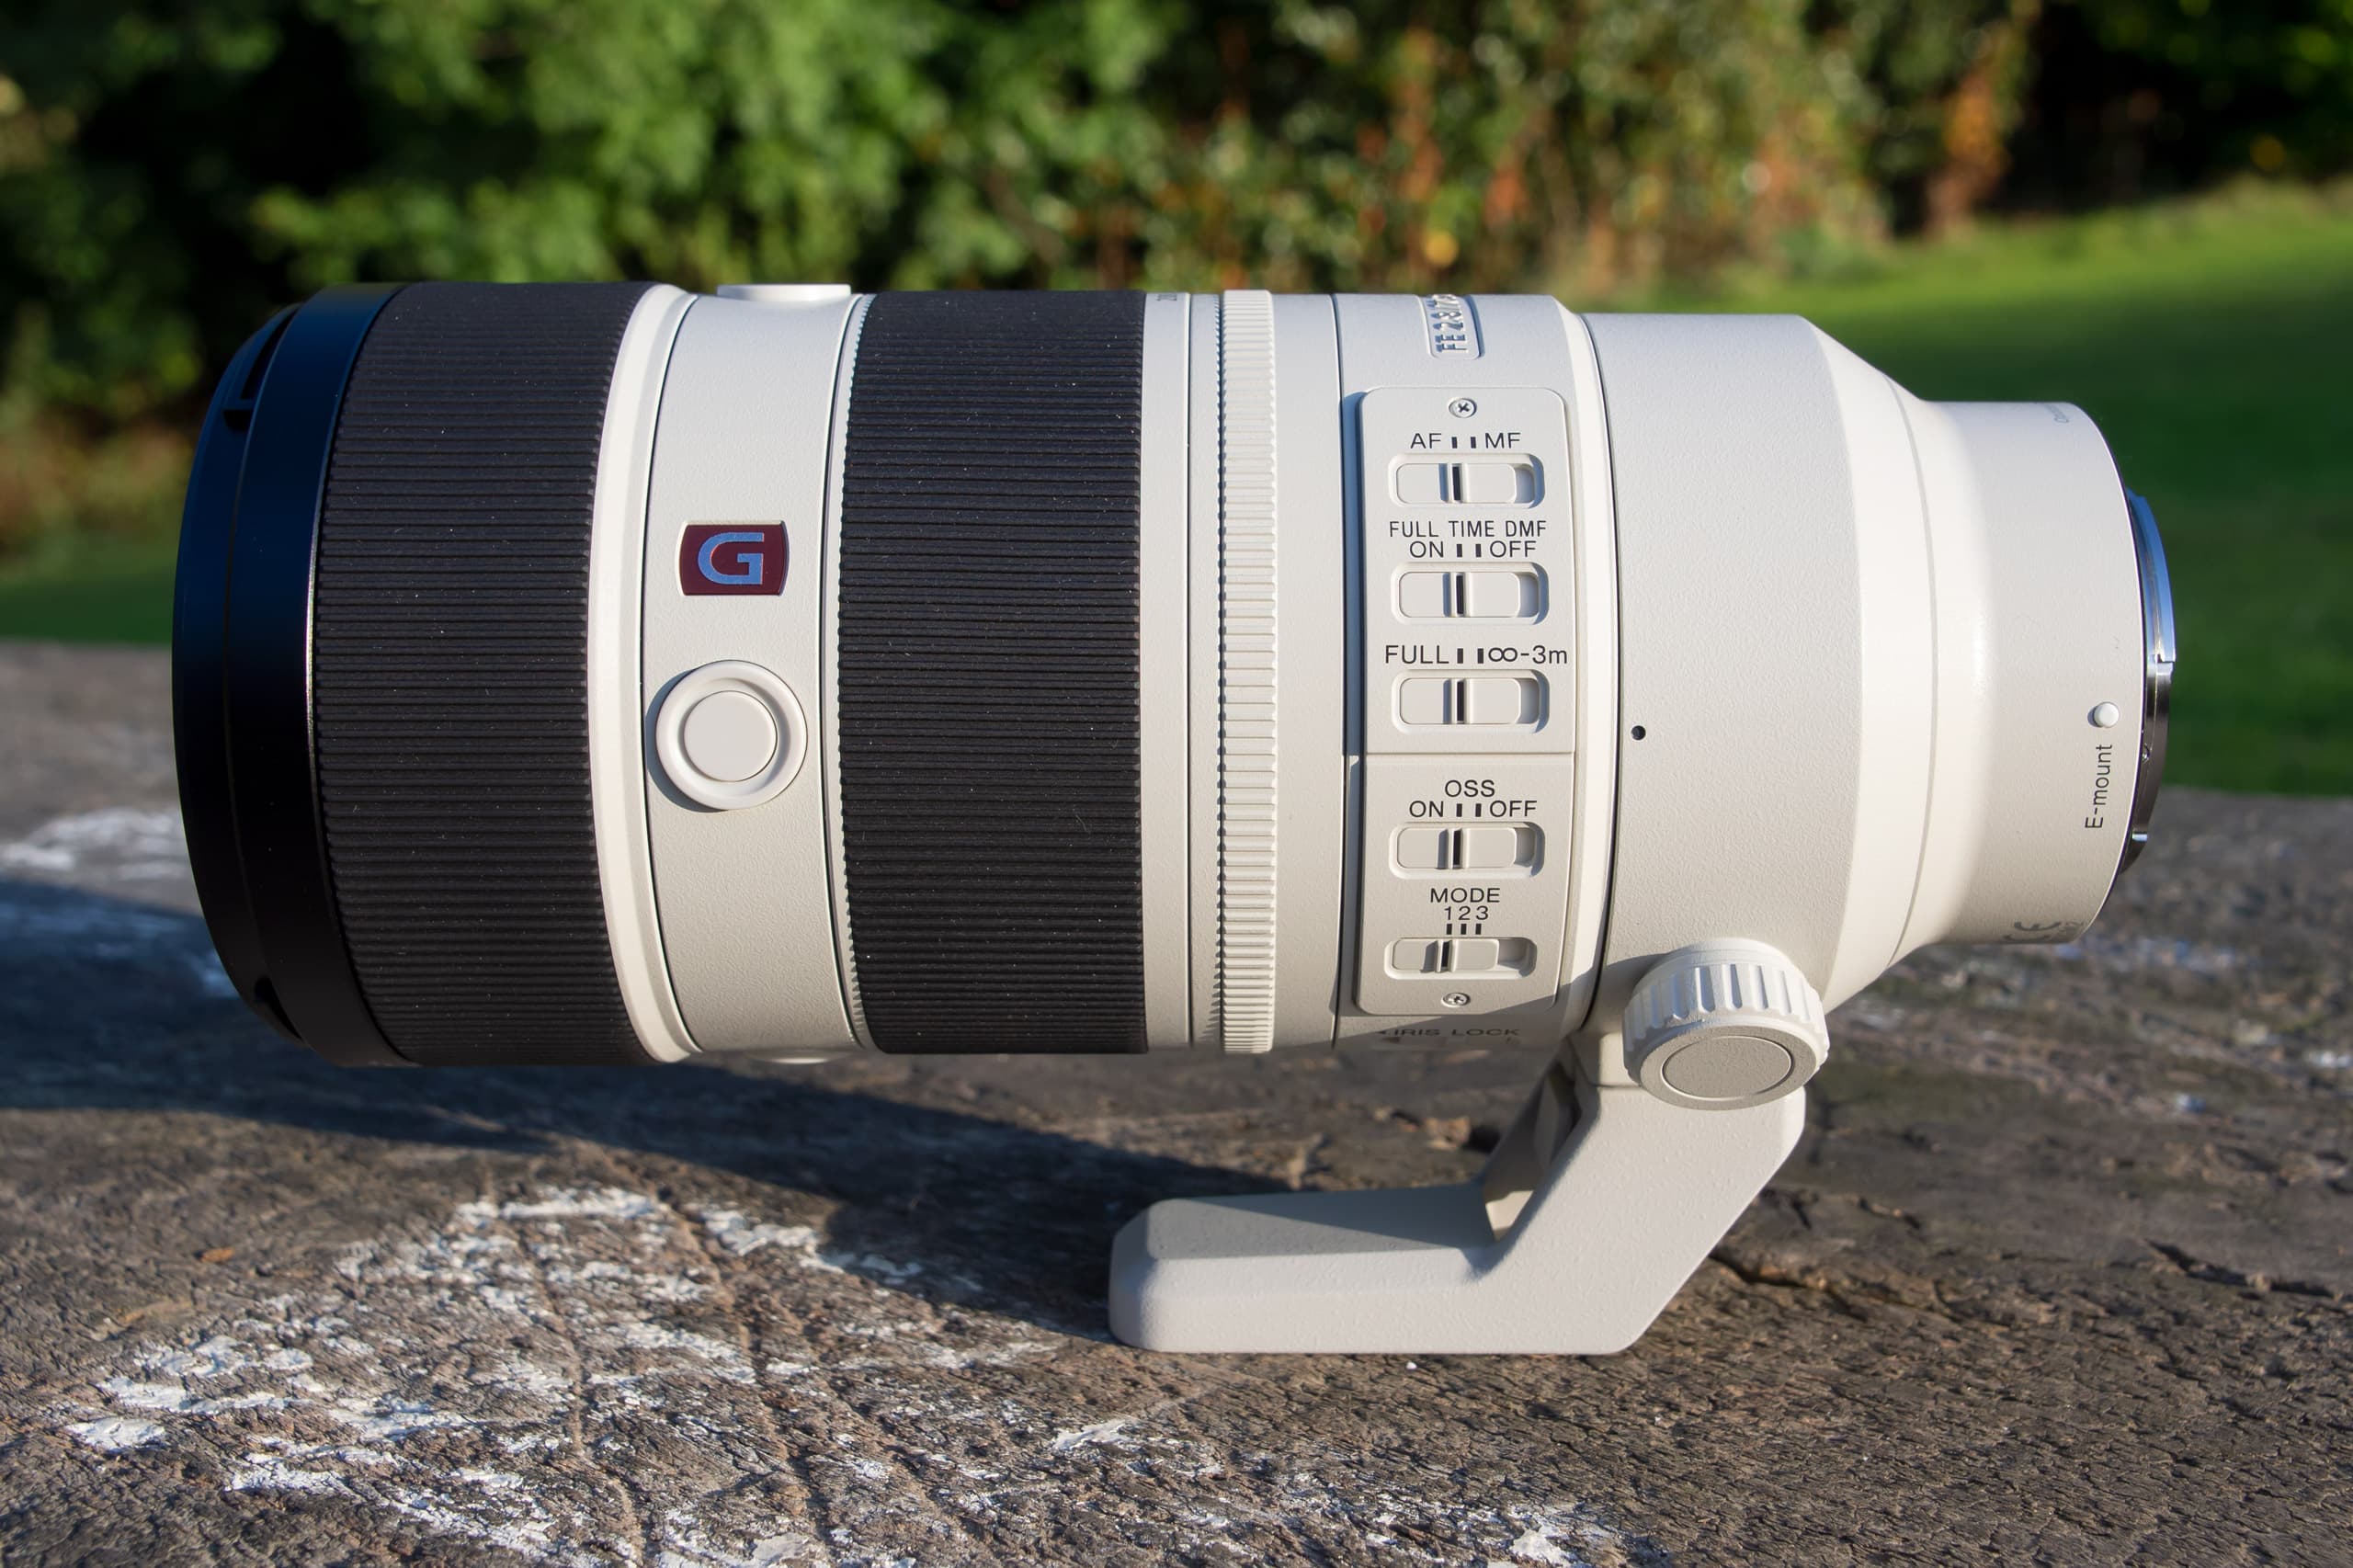 Sony FE 70-200mm f2.8 GM OSS II Review - Amateur Photographer